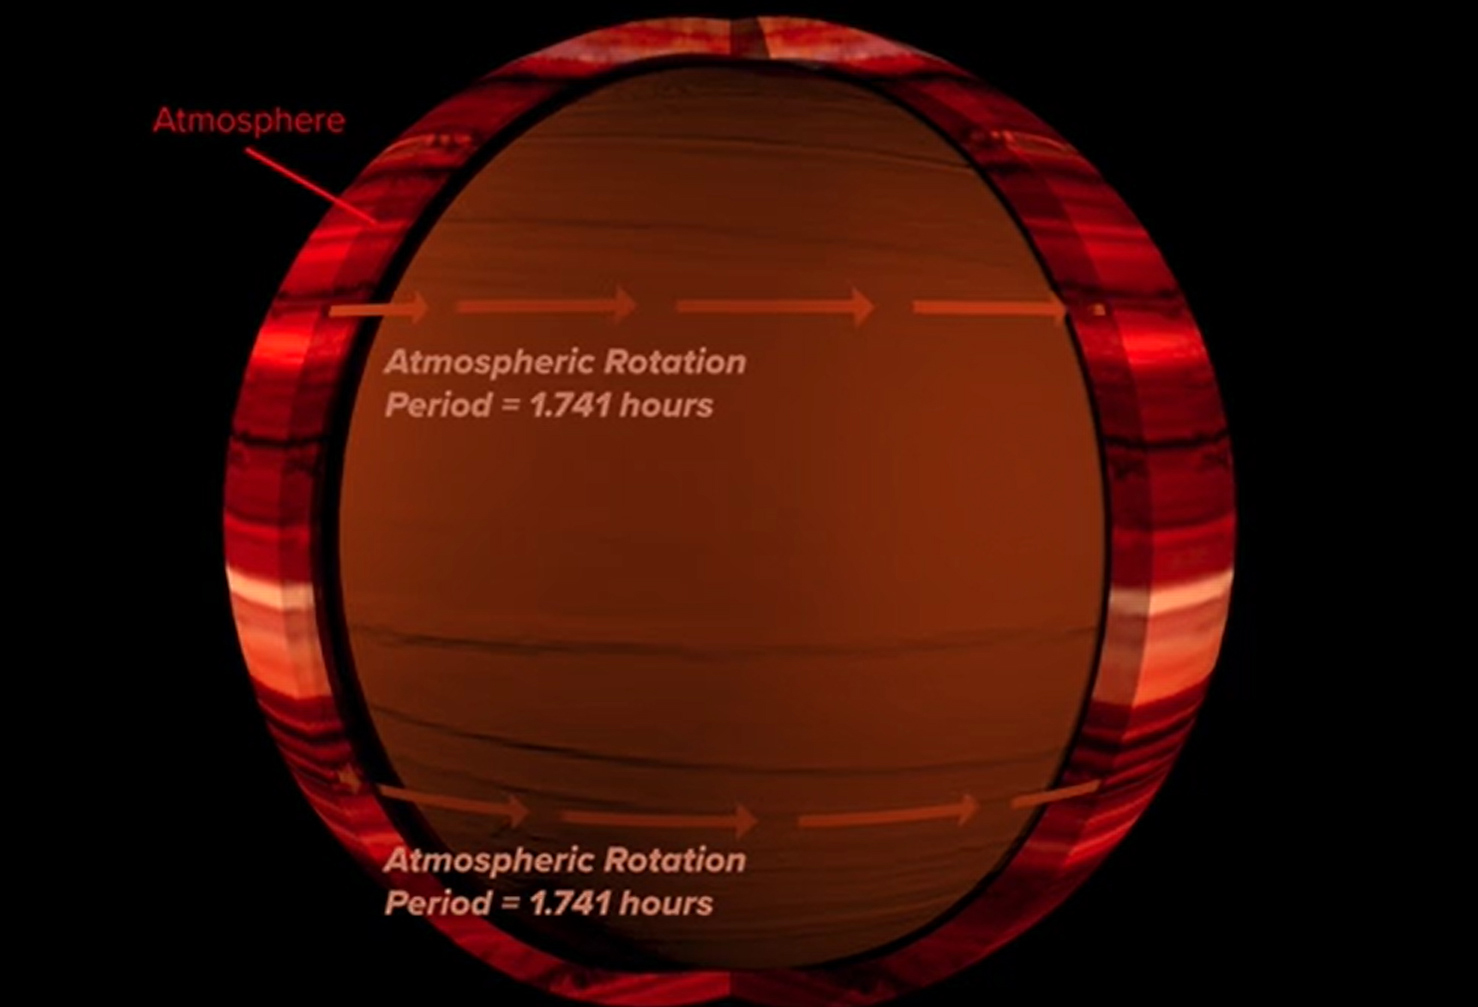 Artist's conception of the atmospheric rotation of brown dwarf 2MASS J1047+21, which was measured at 1.741 hours.